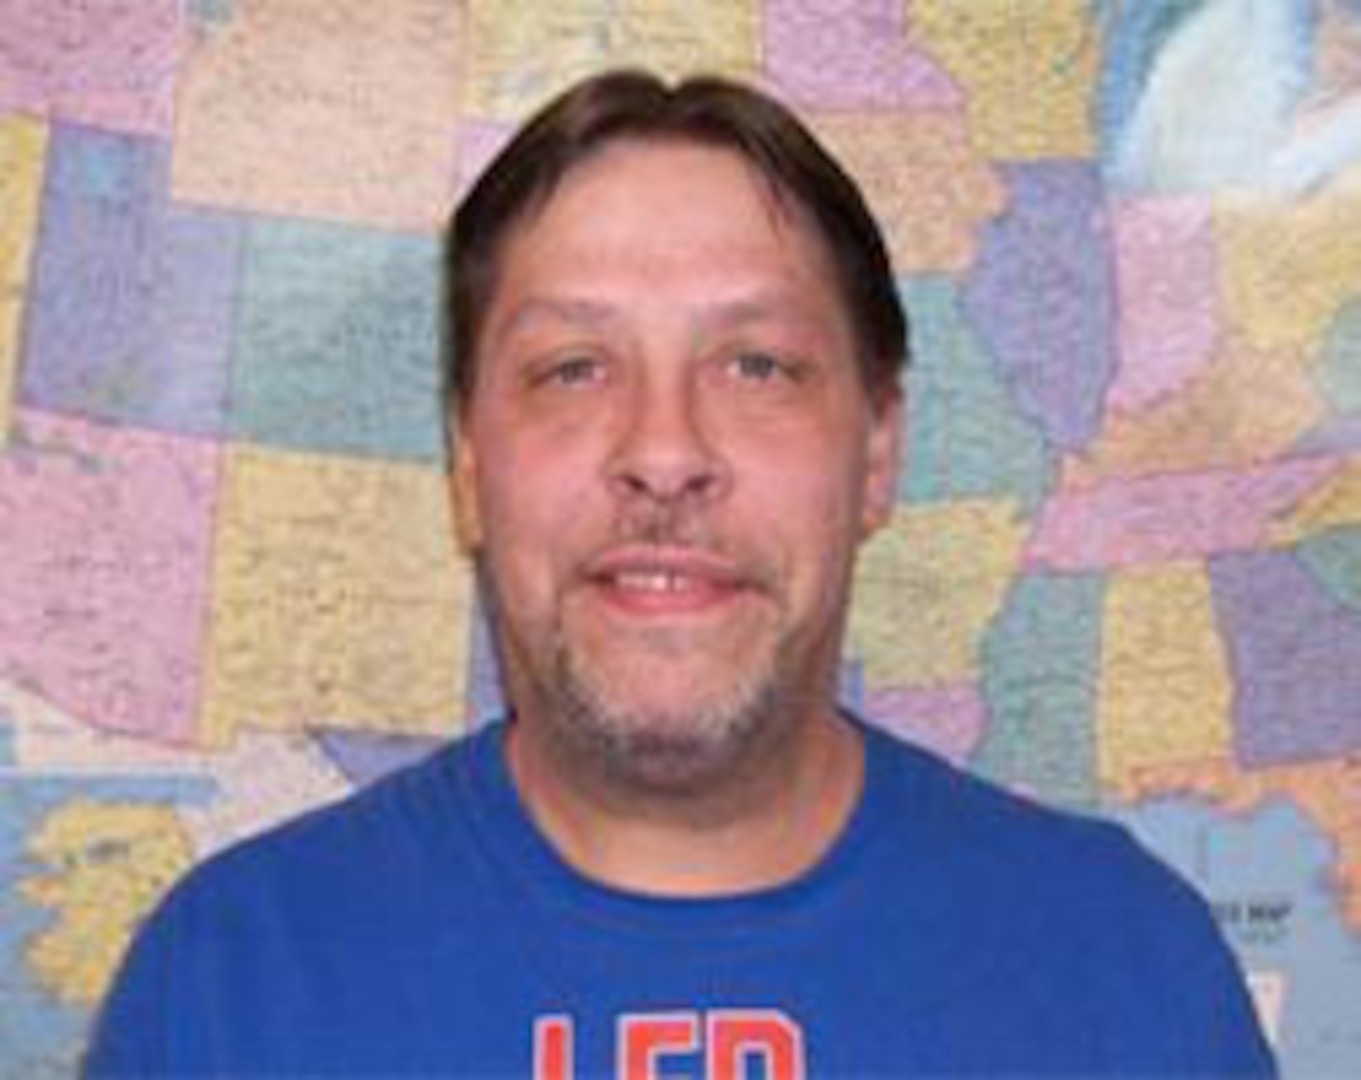 Peter Blazevic, lead supply technician in the Special Commodities Branch of the bulk division at DLA Distribution Susquehanna, Pa., has been named Employee of the Week for the week of April 25 to 29.